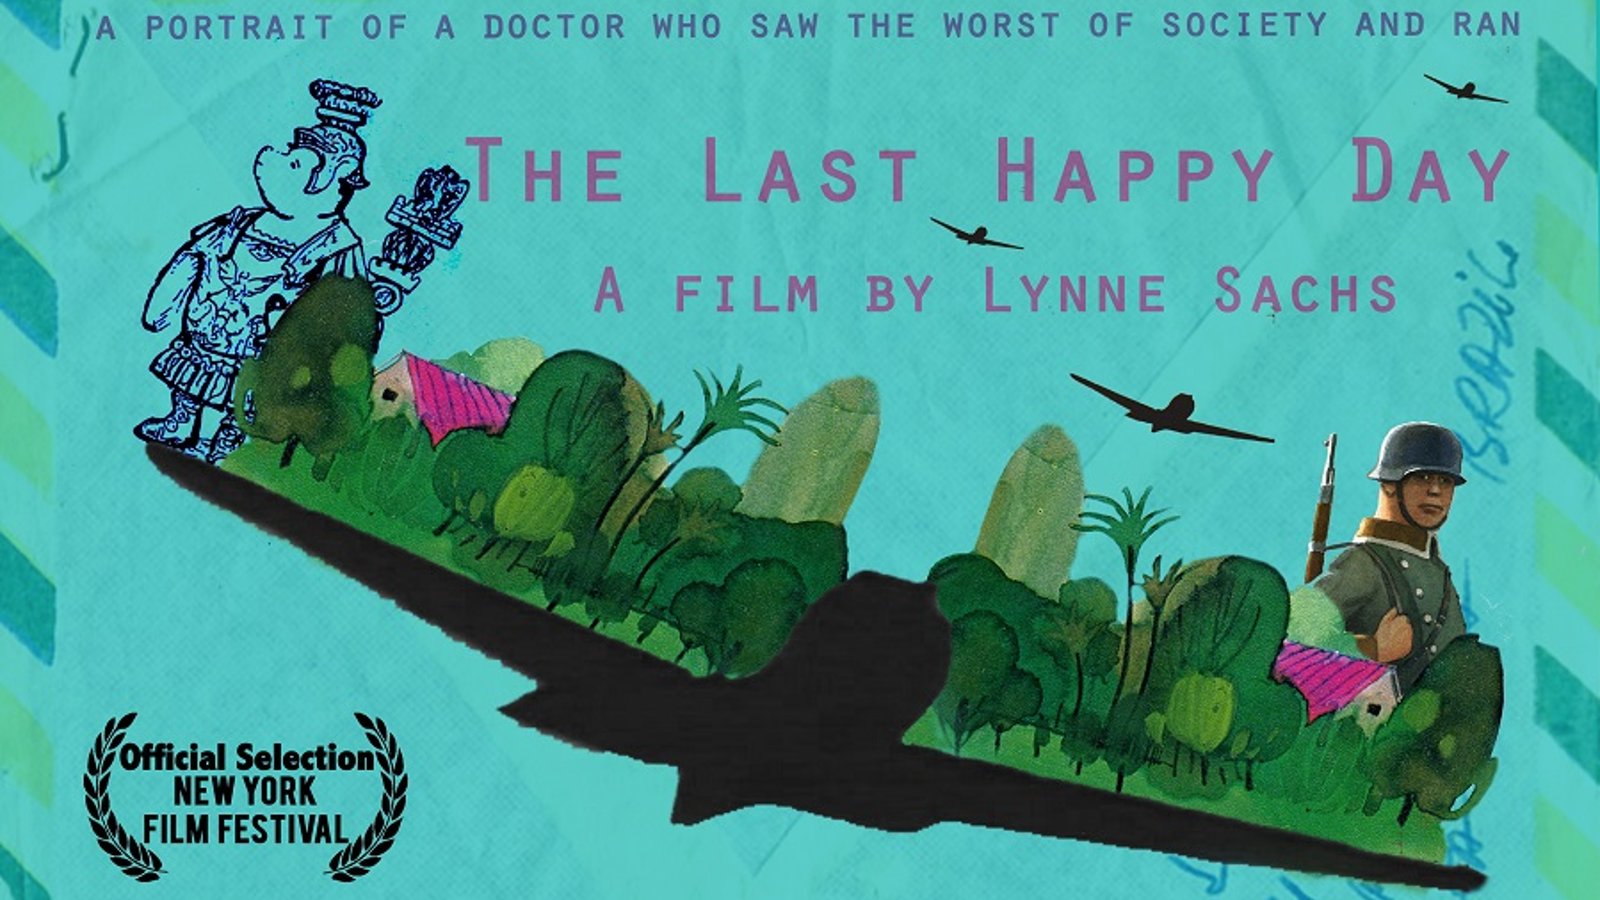 The Last Happy Day - An Essay on the Destructive Power of War